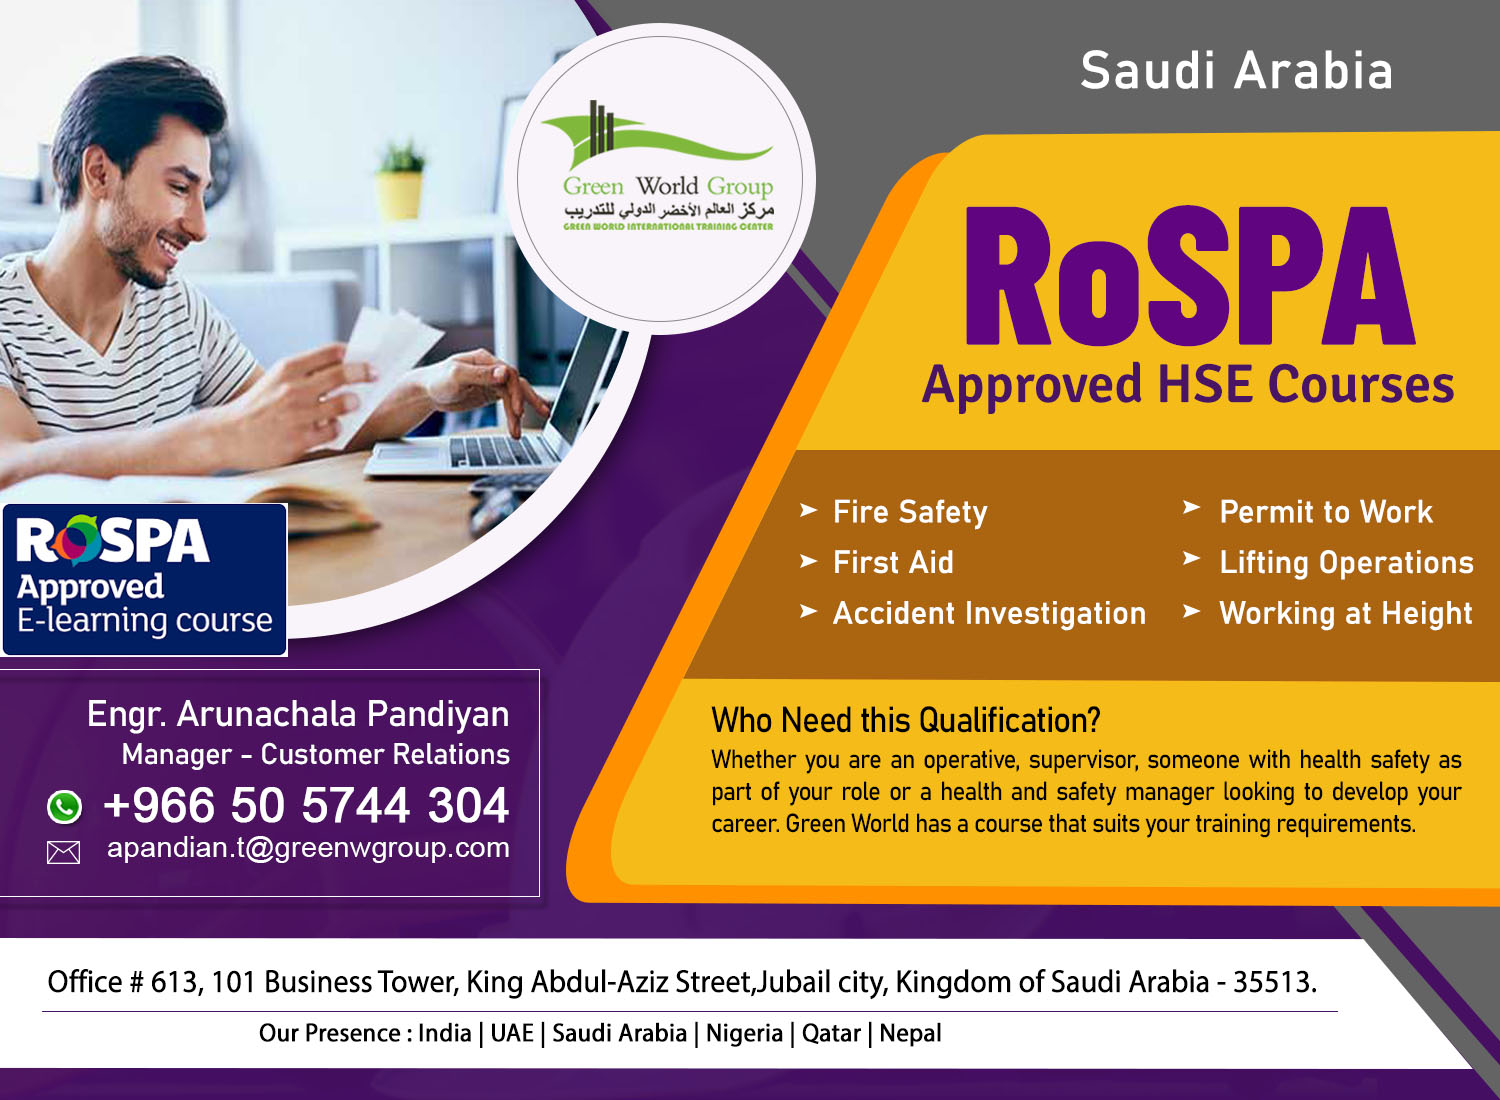 RoSPA-Approved-HSE-Courses-july-2020